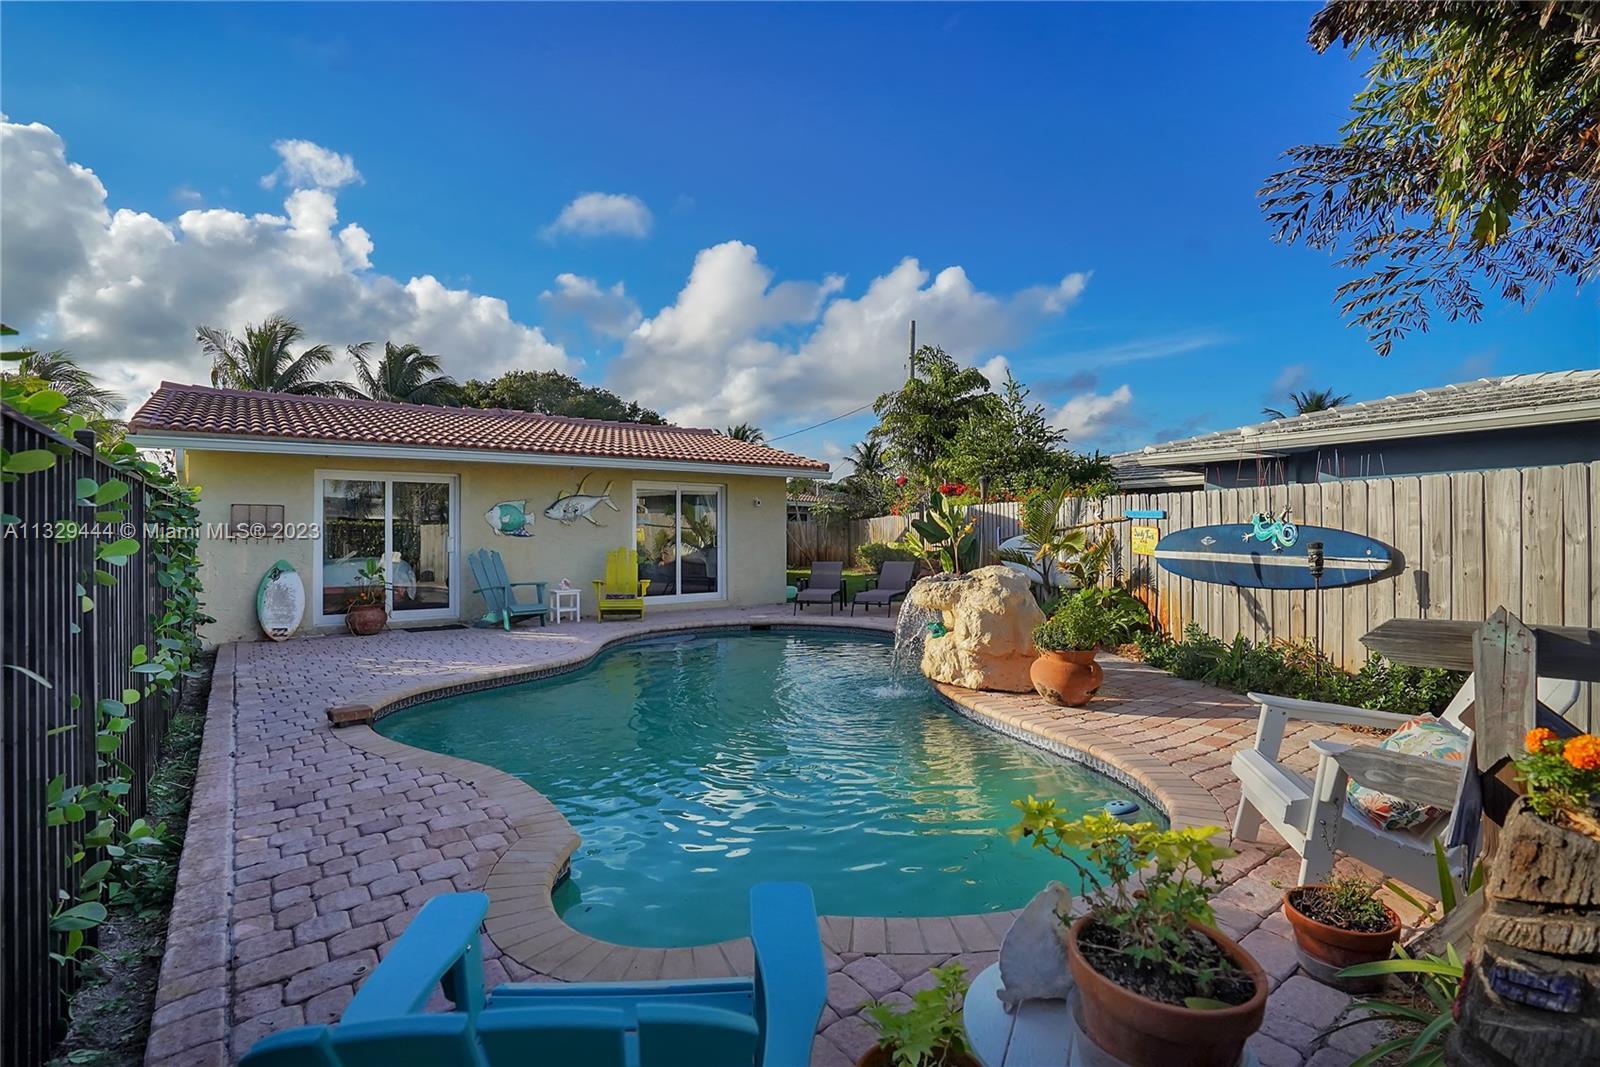 Beautifully remodeled Tropical 3/2 pool home in the Cove. Huge Corner lot. Brand new Impact windows 